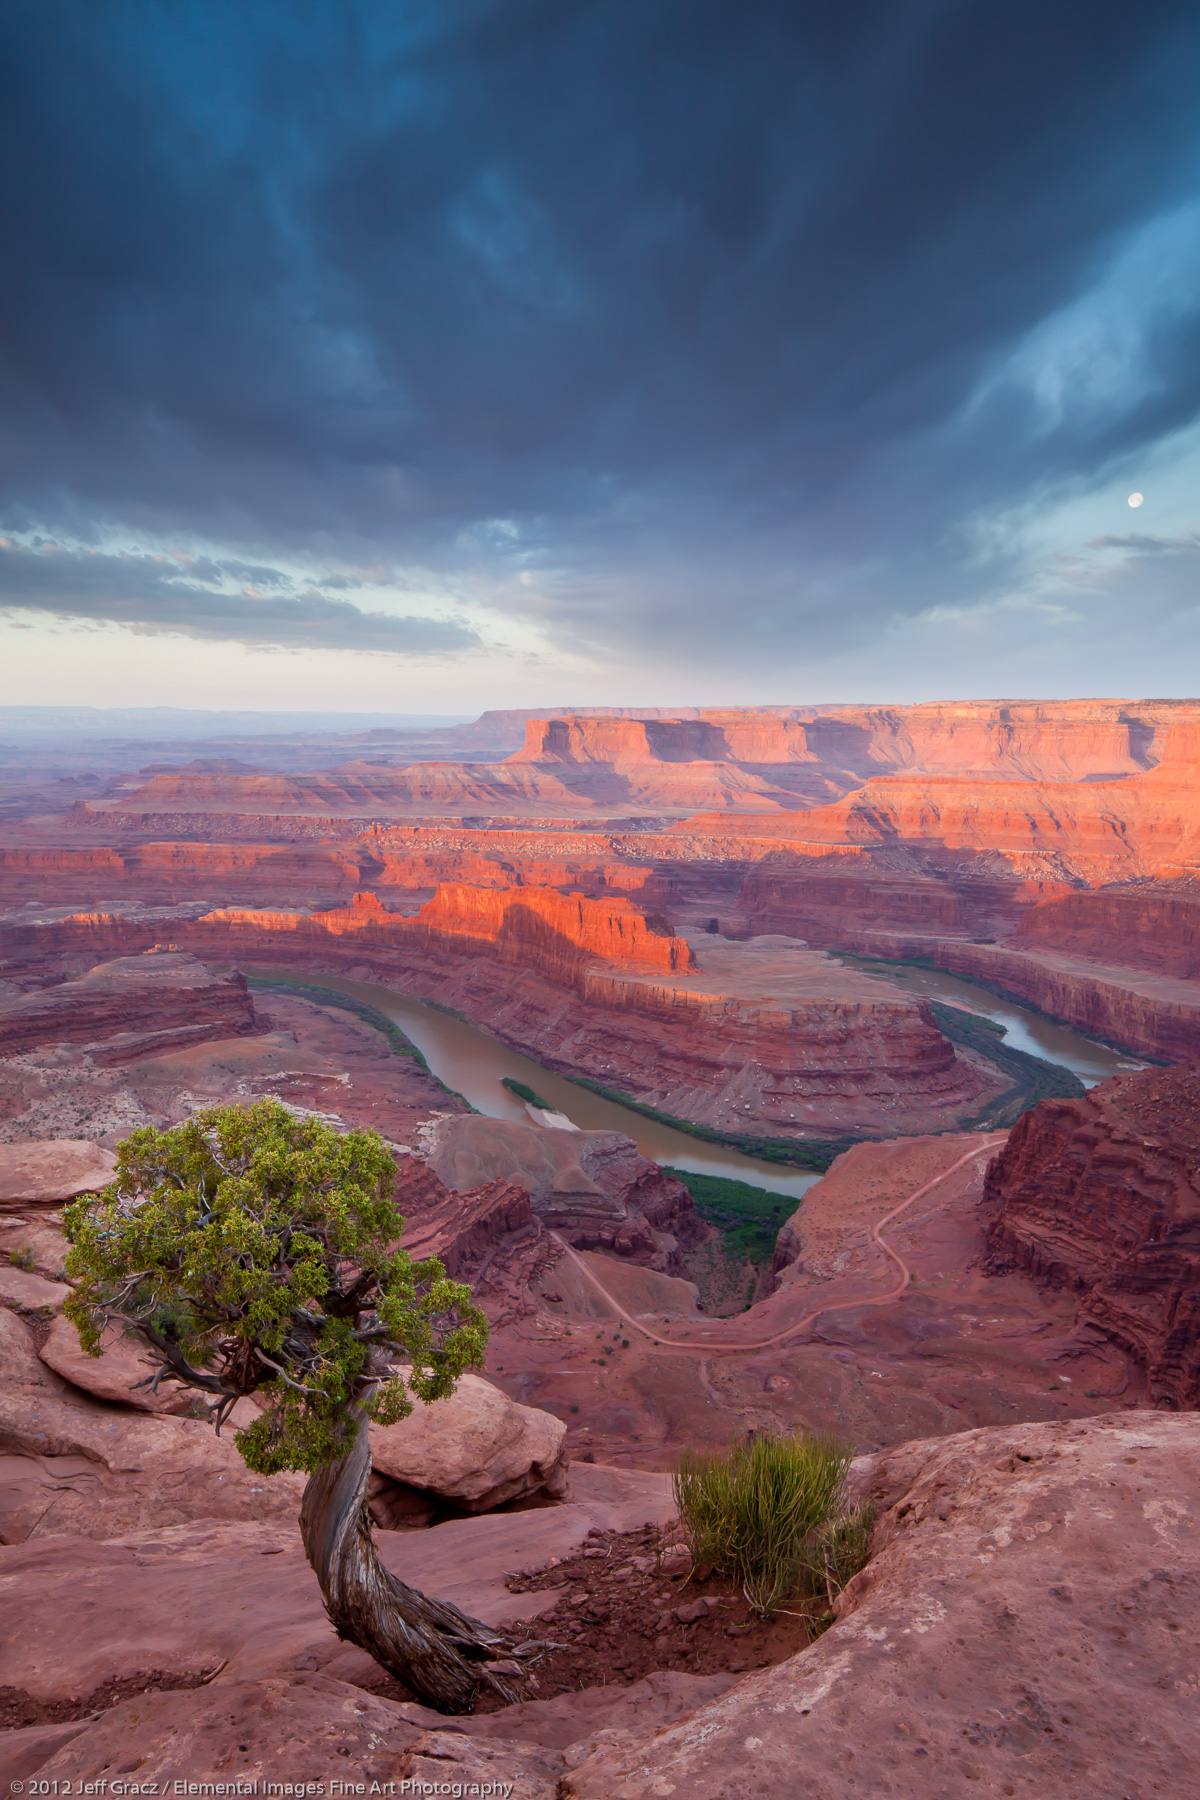 Canyon Sunrise | Dead Horse Point State Park | UT | USA - © © 2012 Jeff Gracz / Elemental Images Fine Art Photography - All Rights Reserved Worldwide